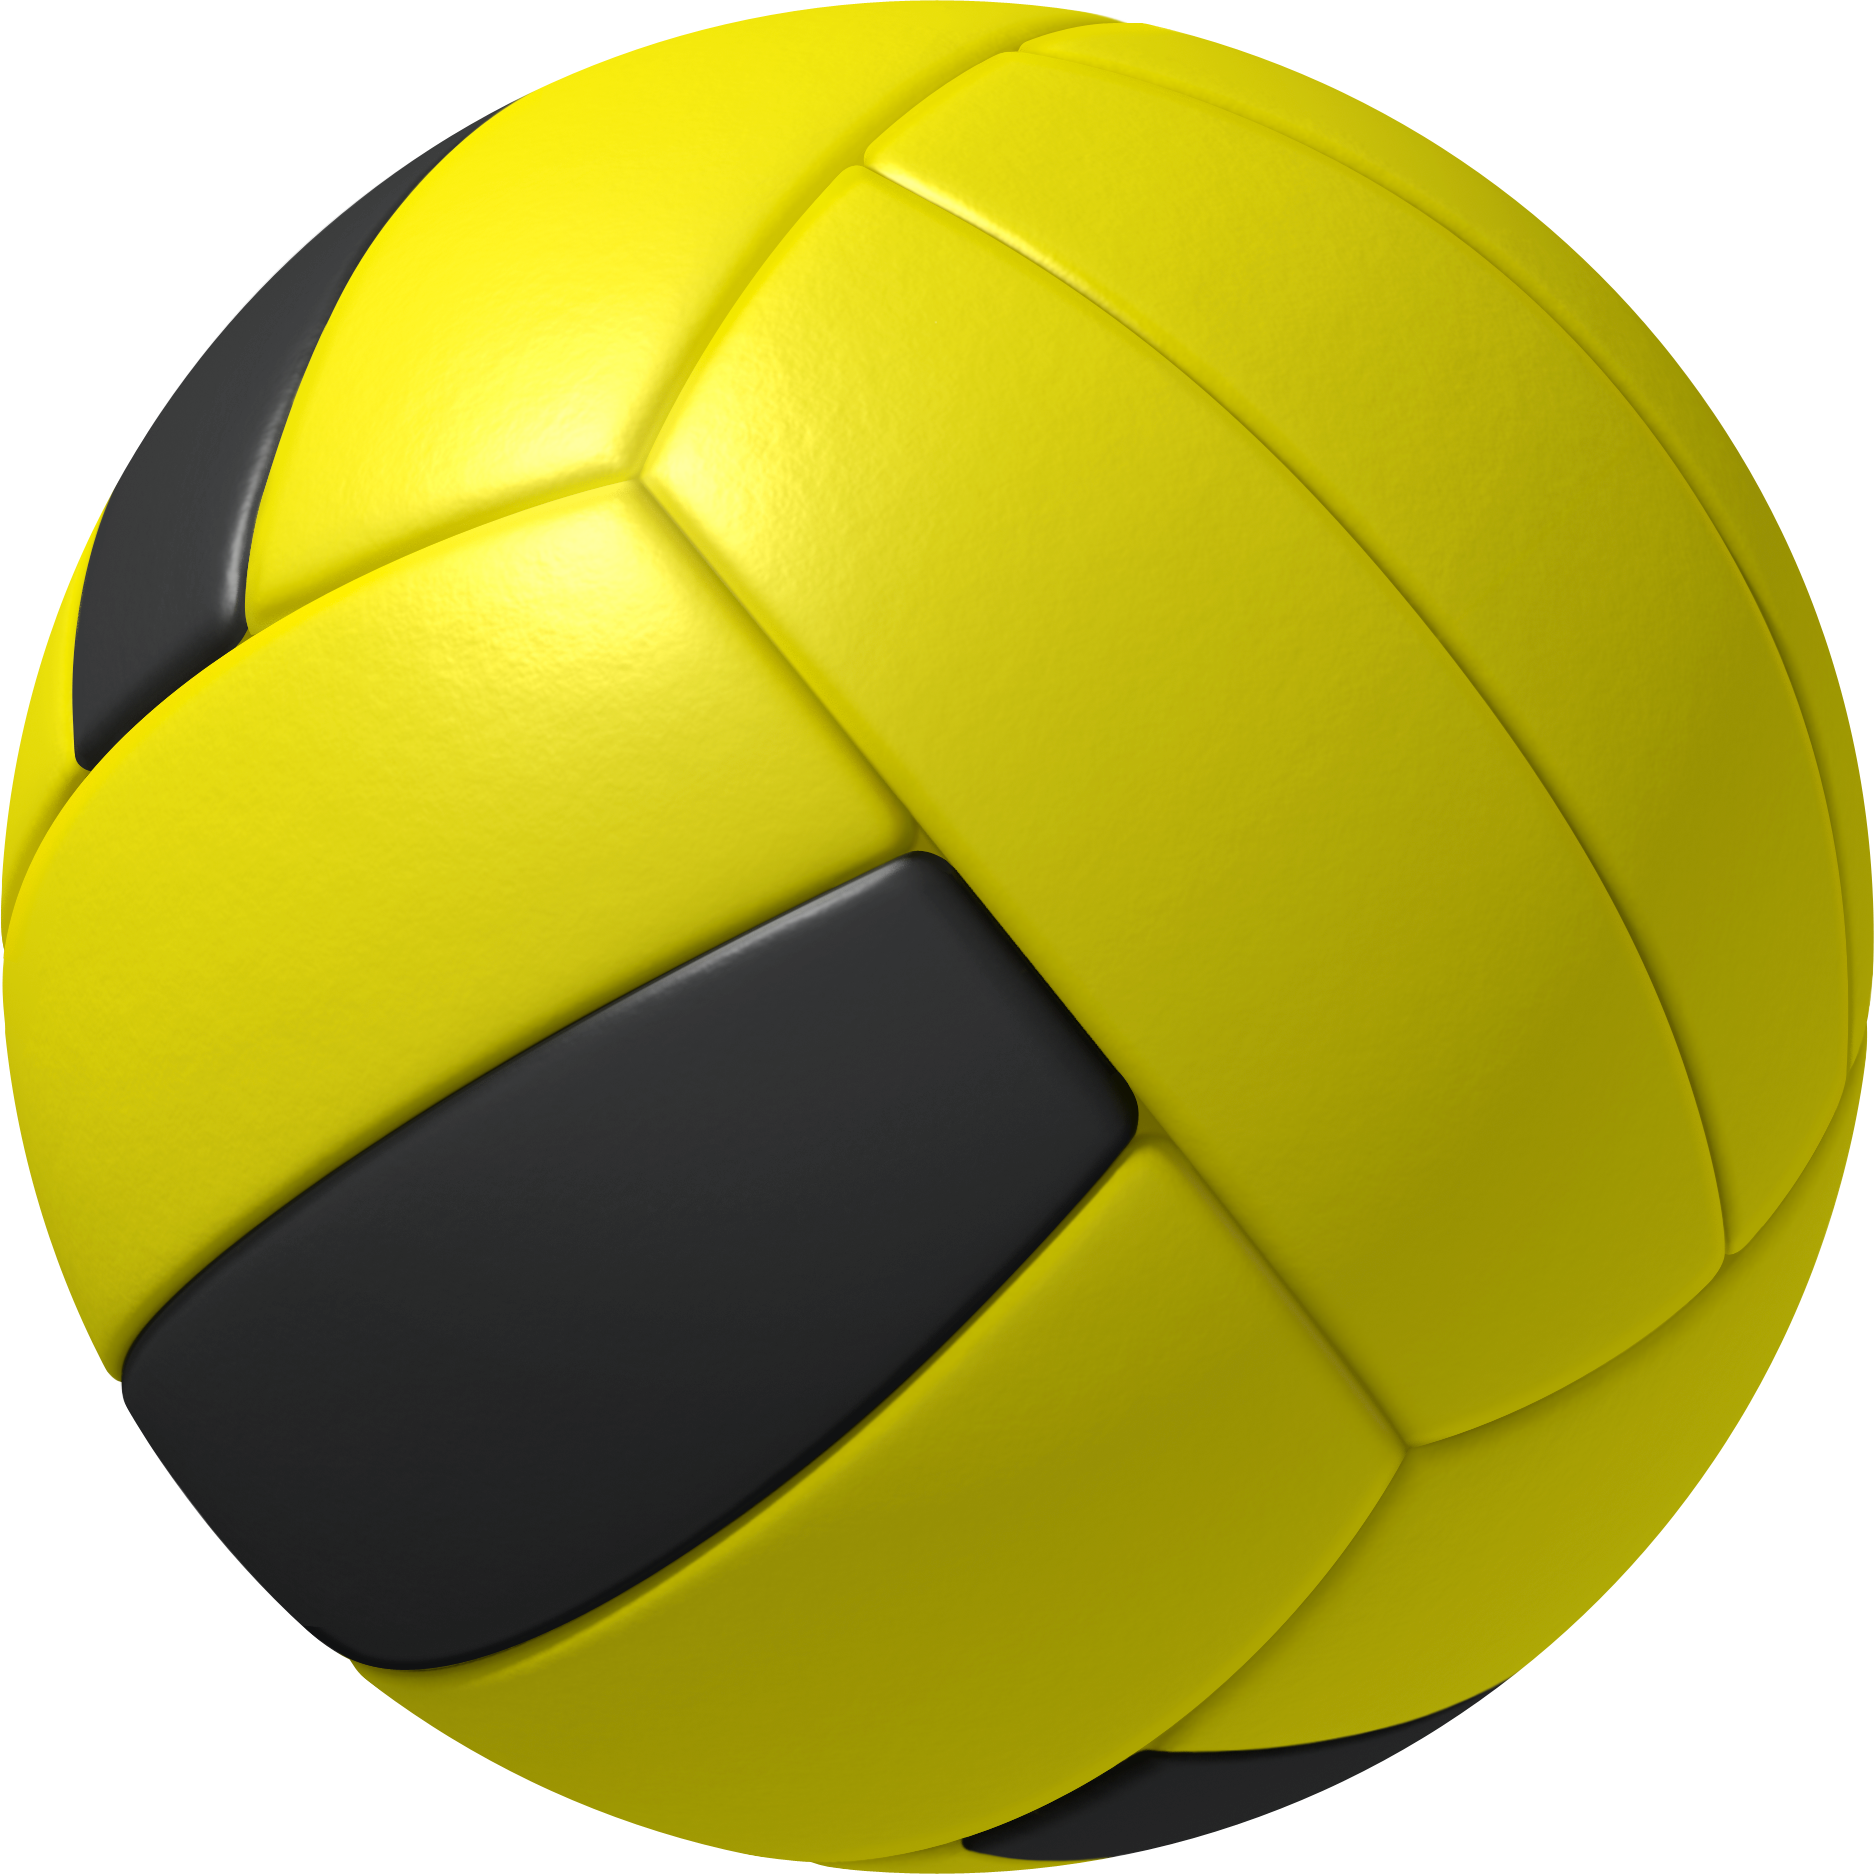 Volleyball Png Pic - Volleyball Net, Transparent background PNG HD thumbnail